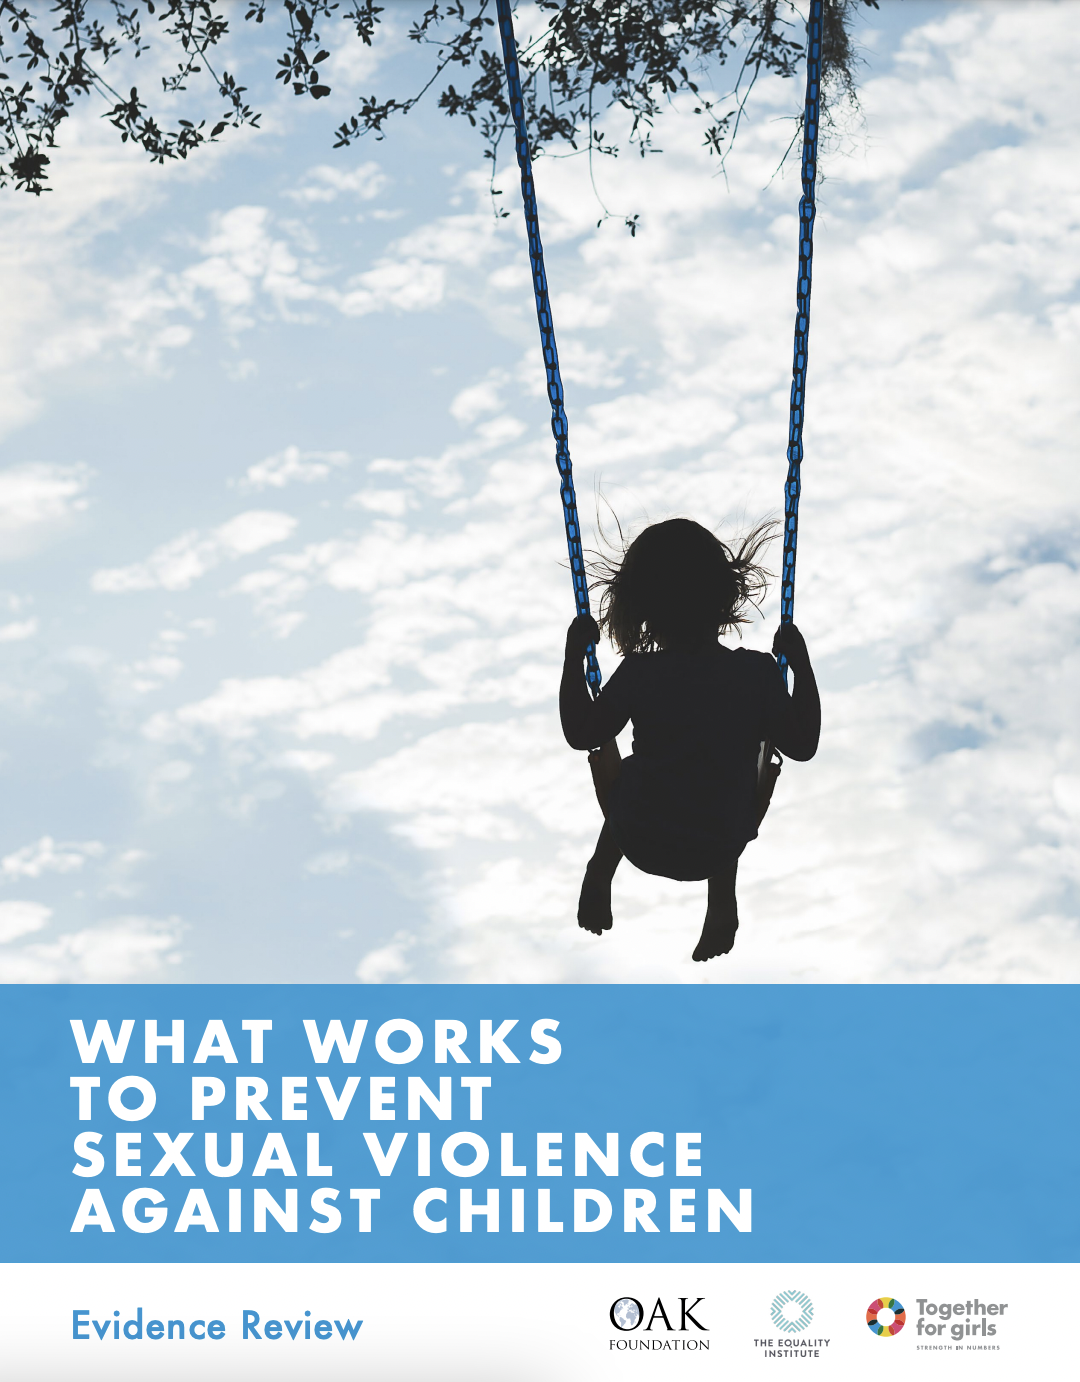 https://www.togetherforgirls.org/_next/image?url=https%3A%2F%2Ffiles.mutualcdn.com%2Ftfg%2Fassets%2Fimages%2FWhat-Works-to-Prevent-Sexual-Violence-Against-Children-Evidence-Review.png&w=3840&q=75